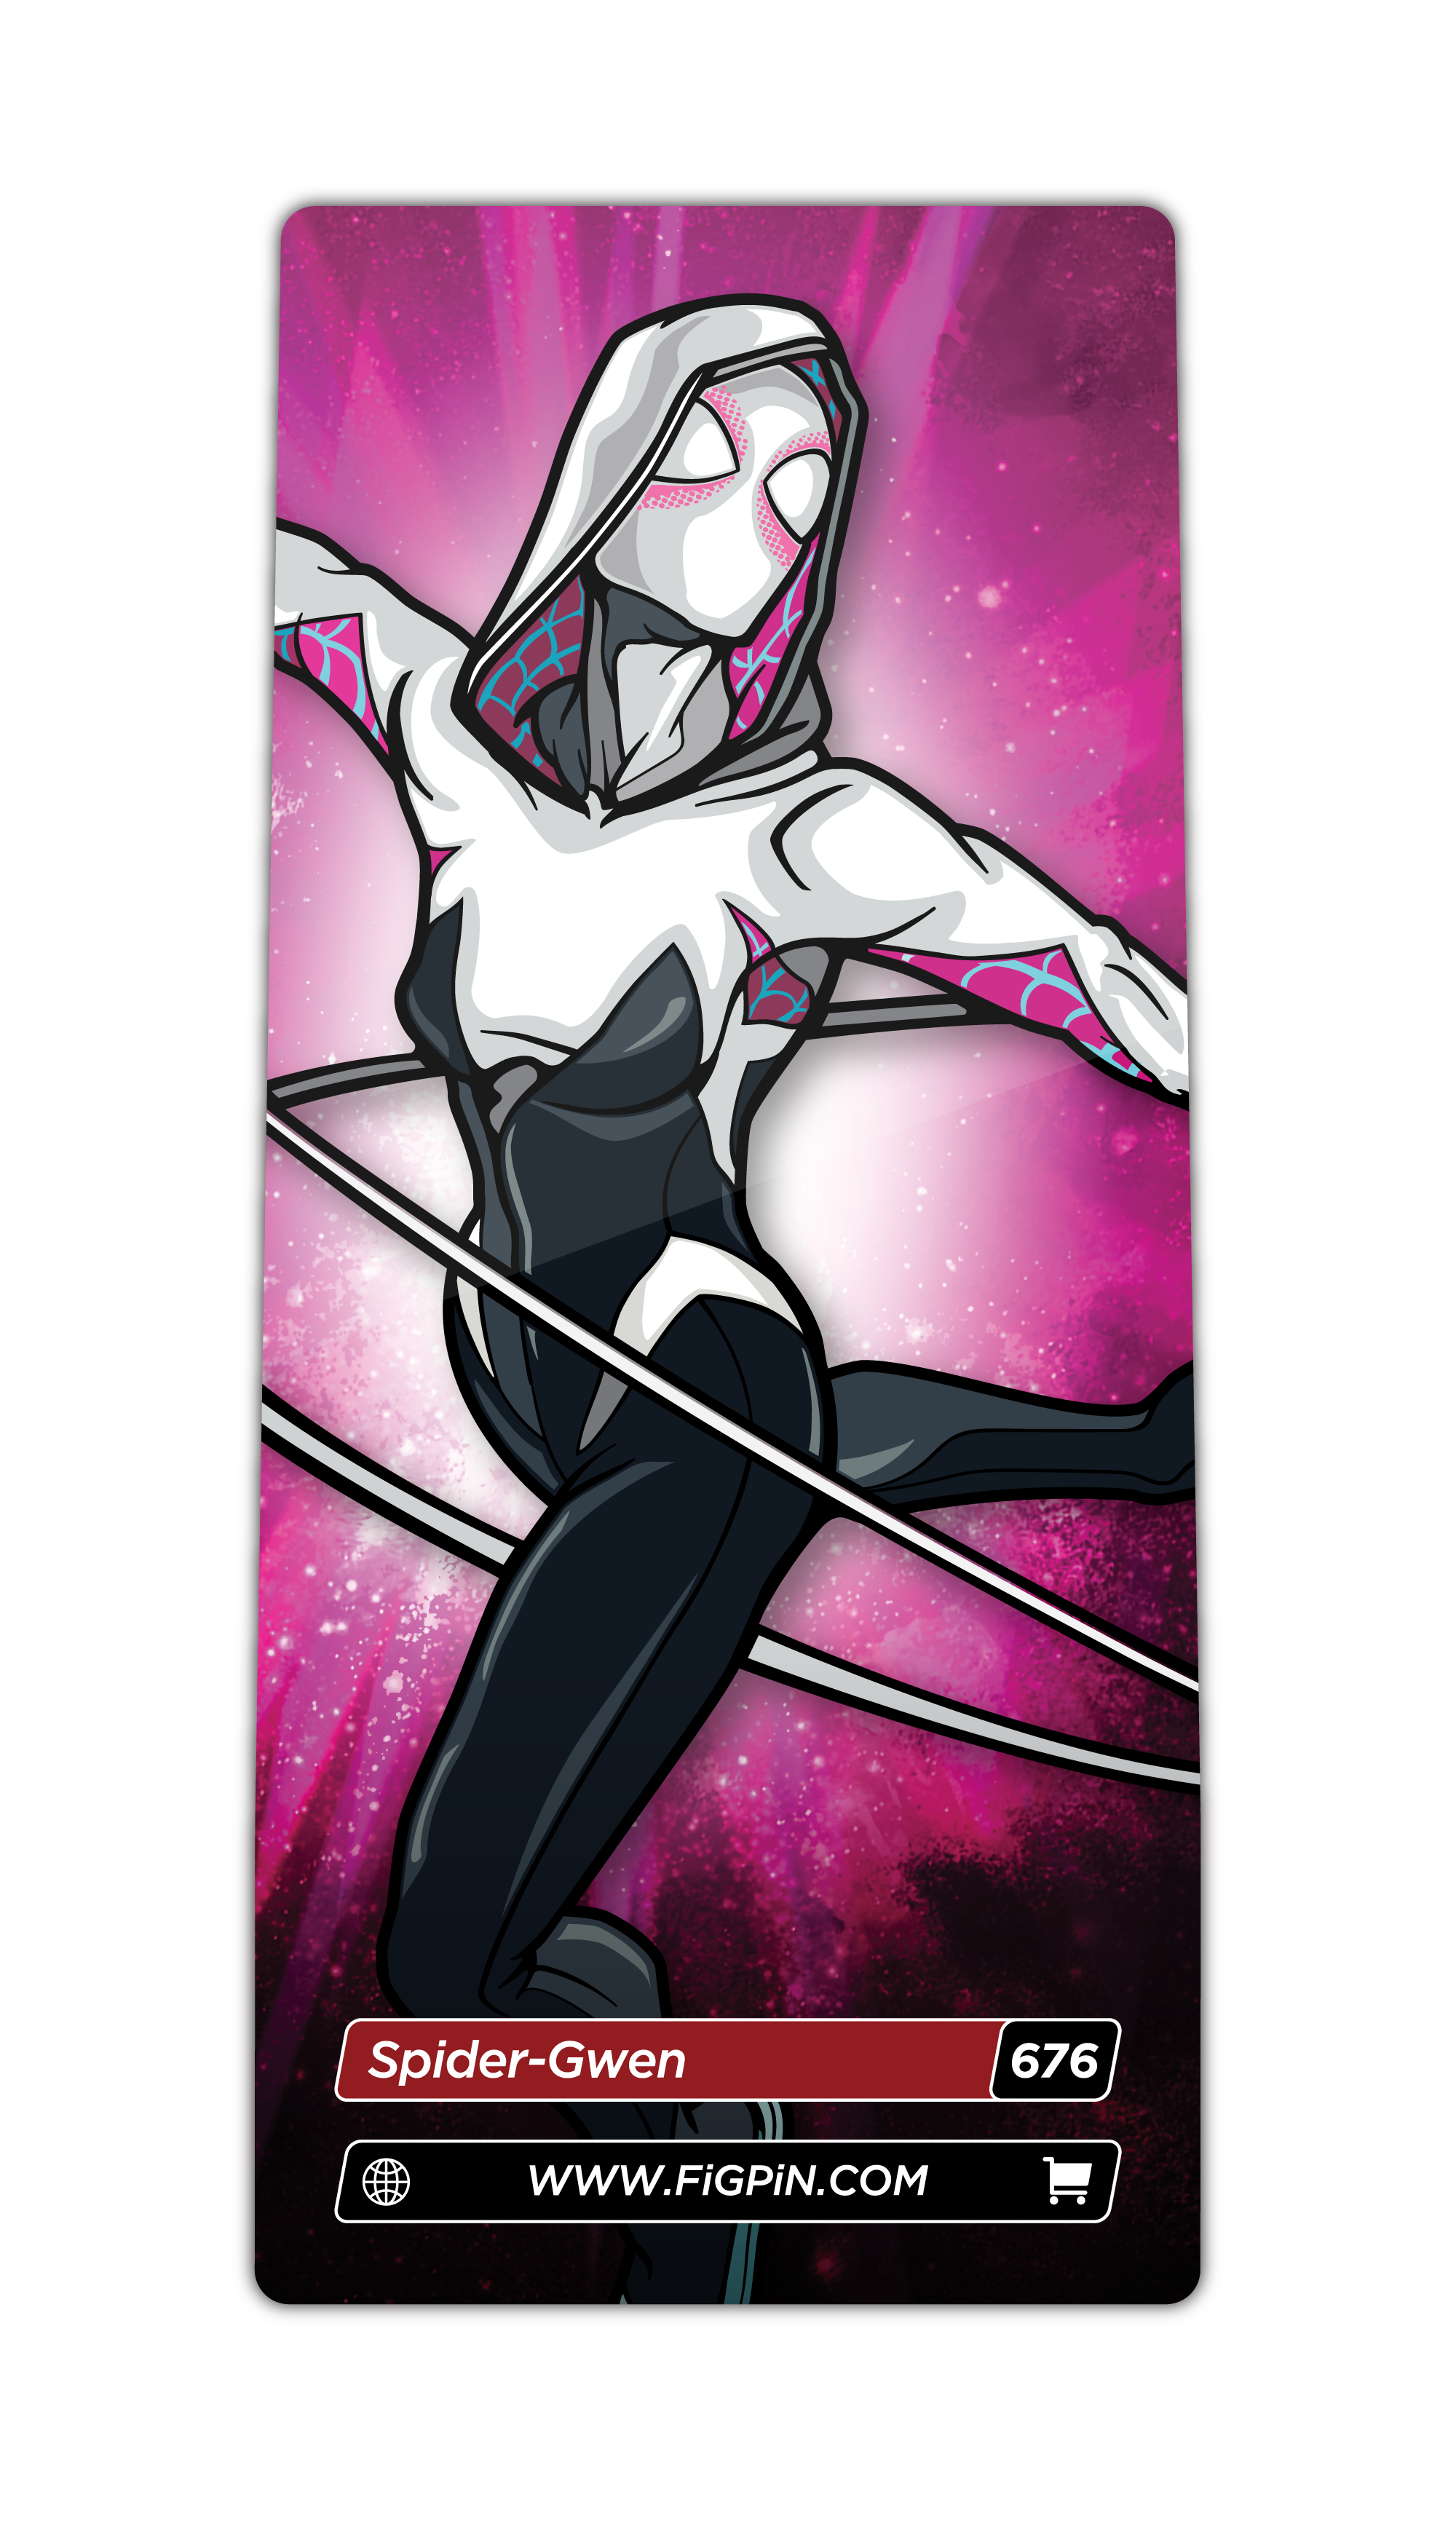 Marvel: Contest of Champions - Spider-Gwen FiGPiN #676 Exclusive